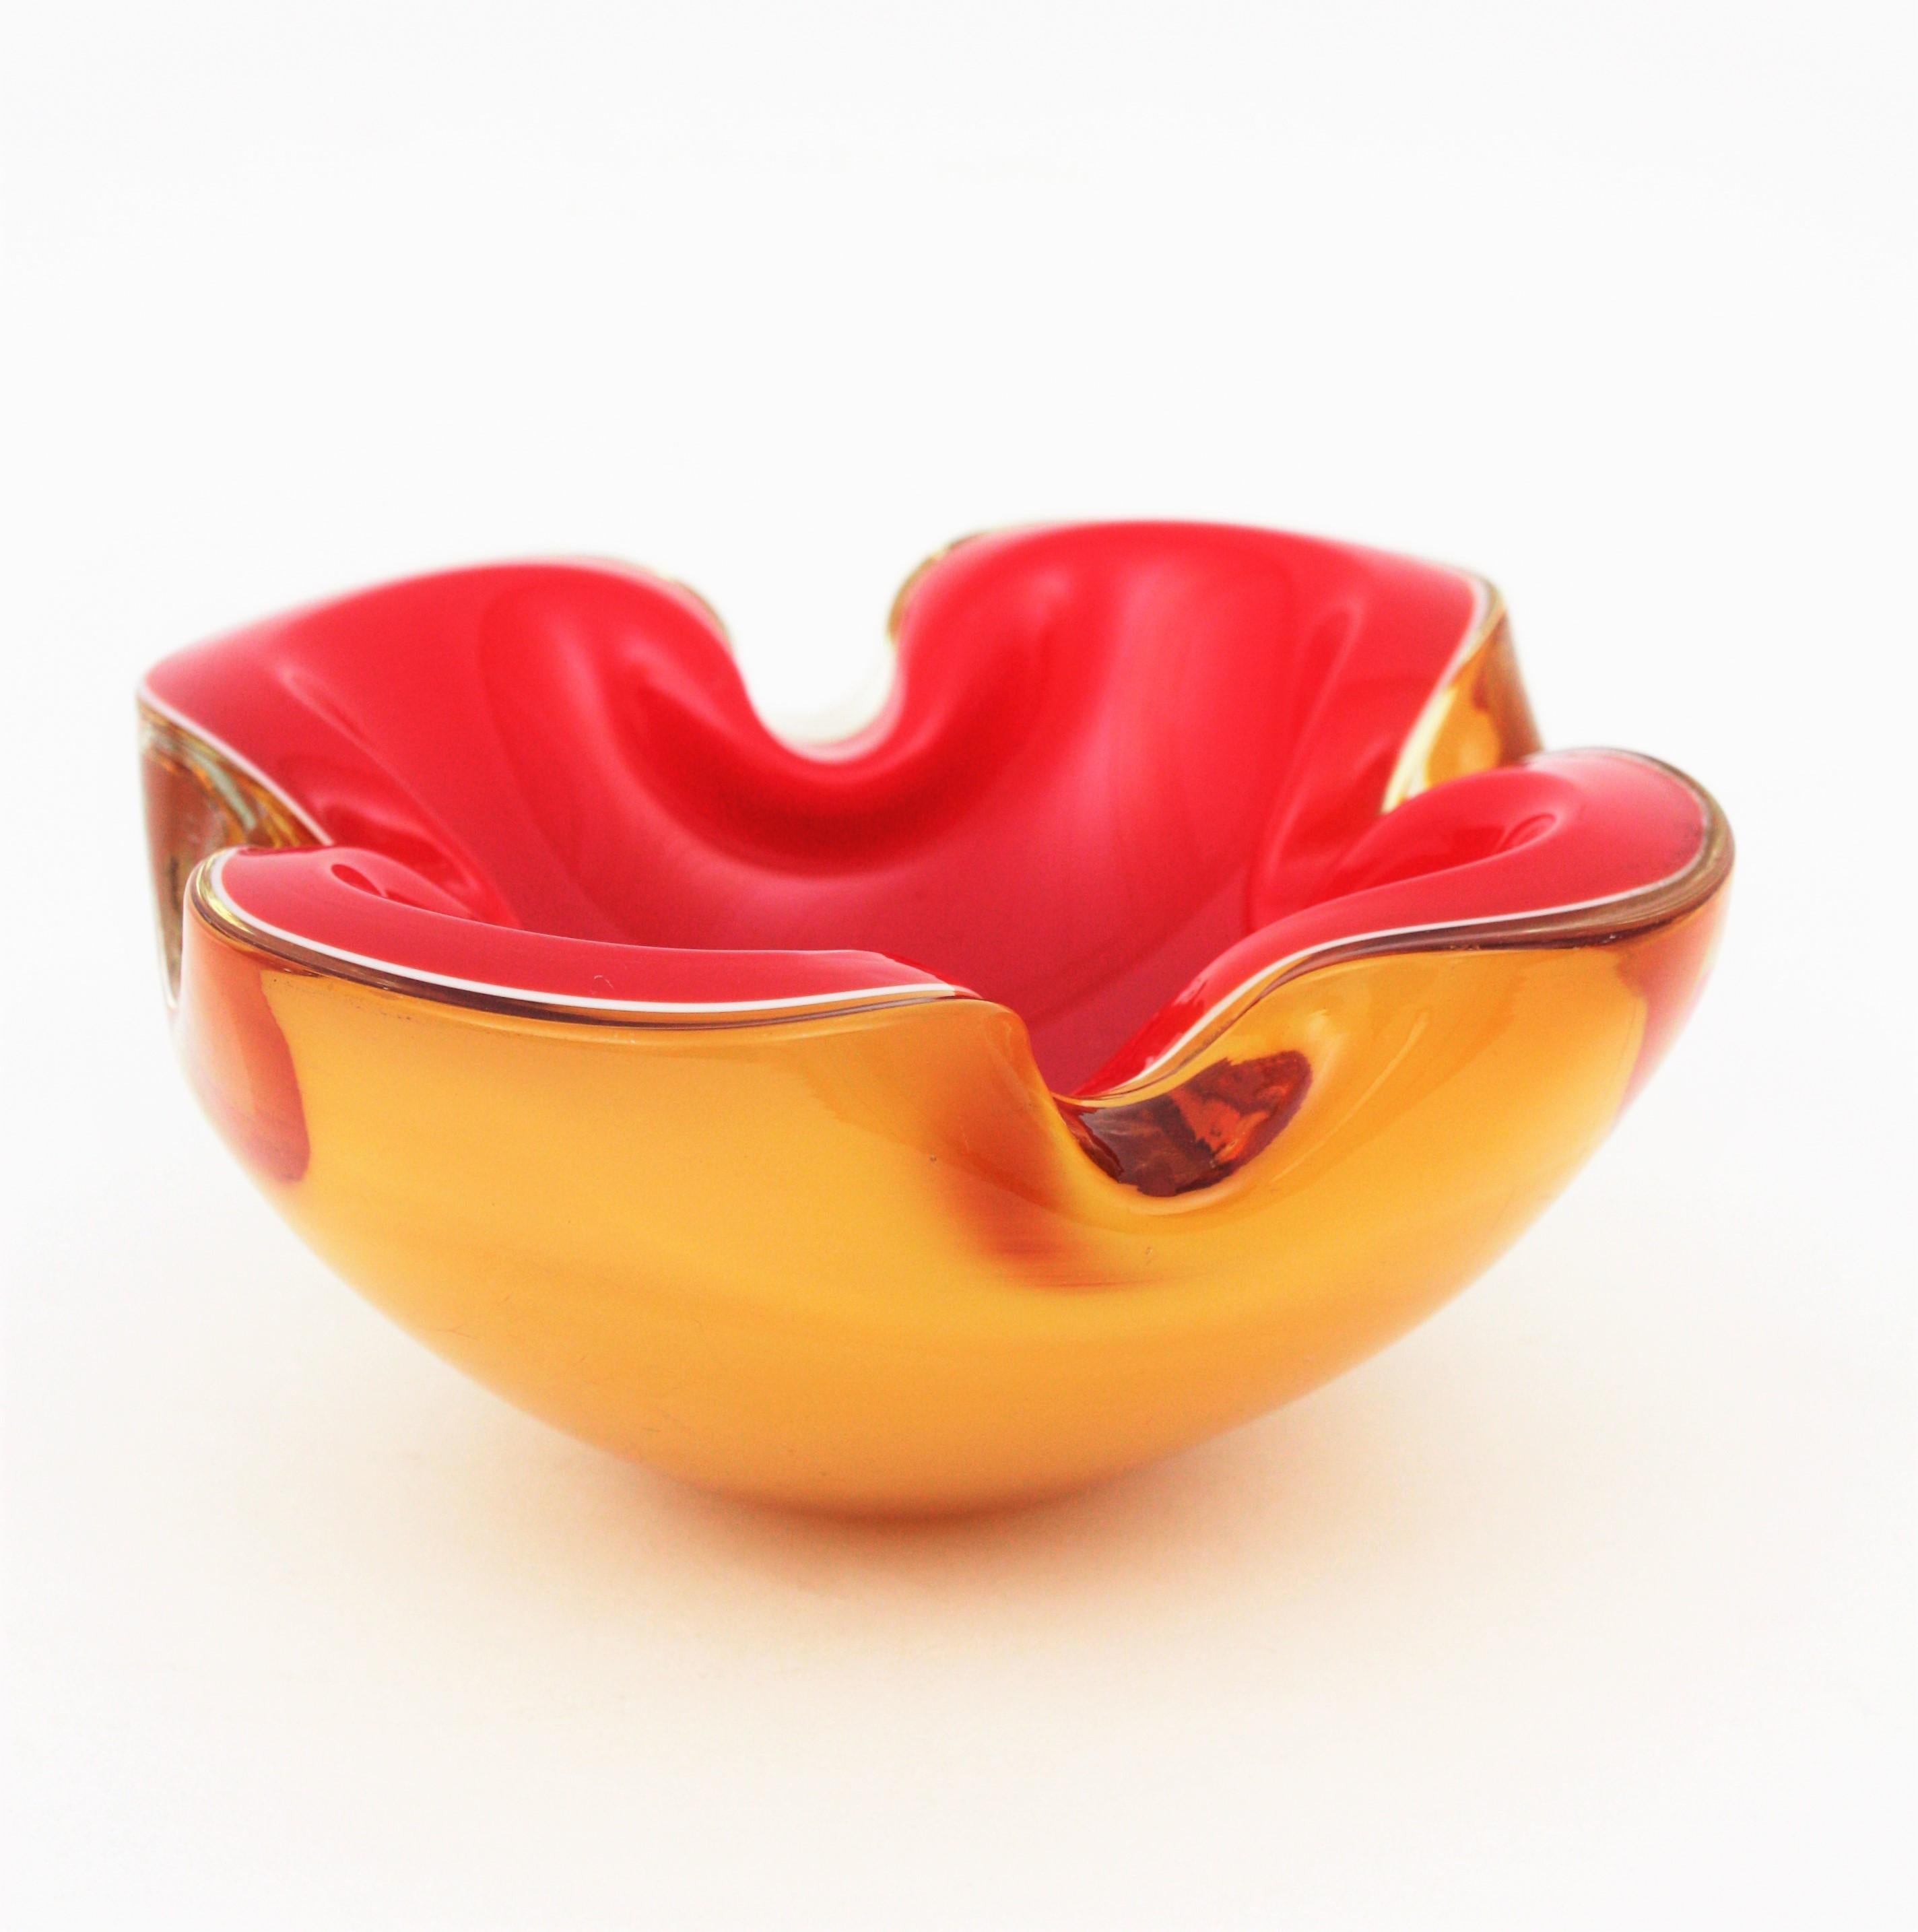 Amazing hand blown Murano glass bowl or ashtray in vibrant colors. Red glass and white glass cased into clear amber glass, highly decorative shapes and spectacular piece to combine with other Murano glass pieces or to use it alone. Use it as